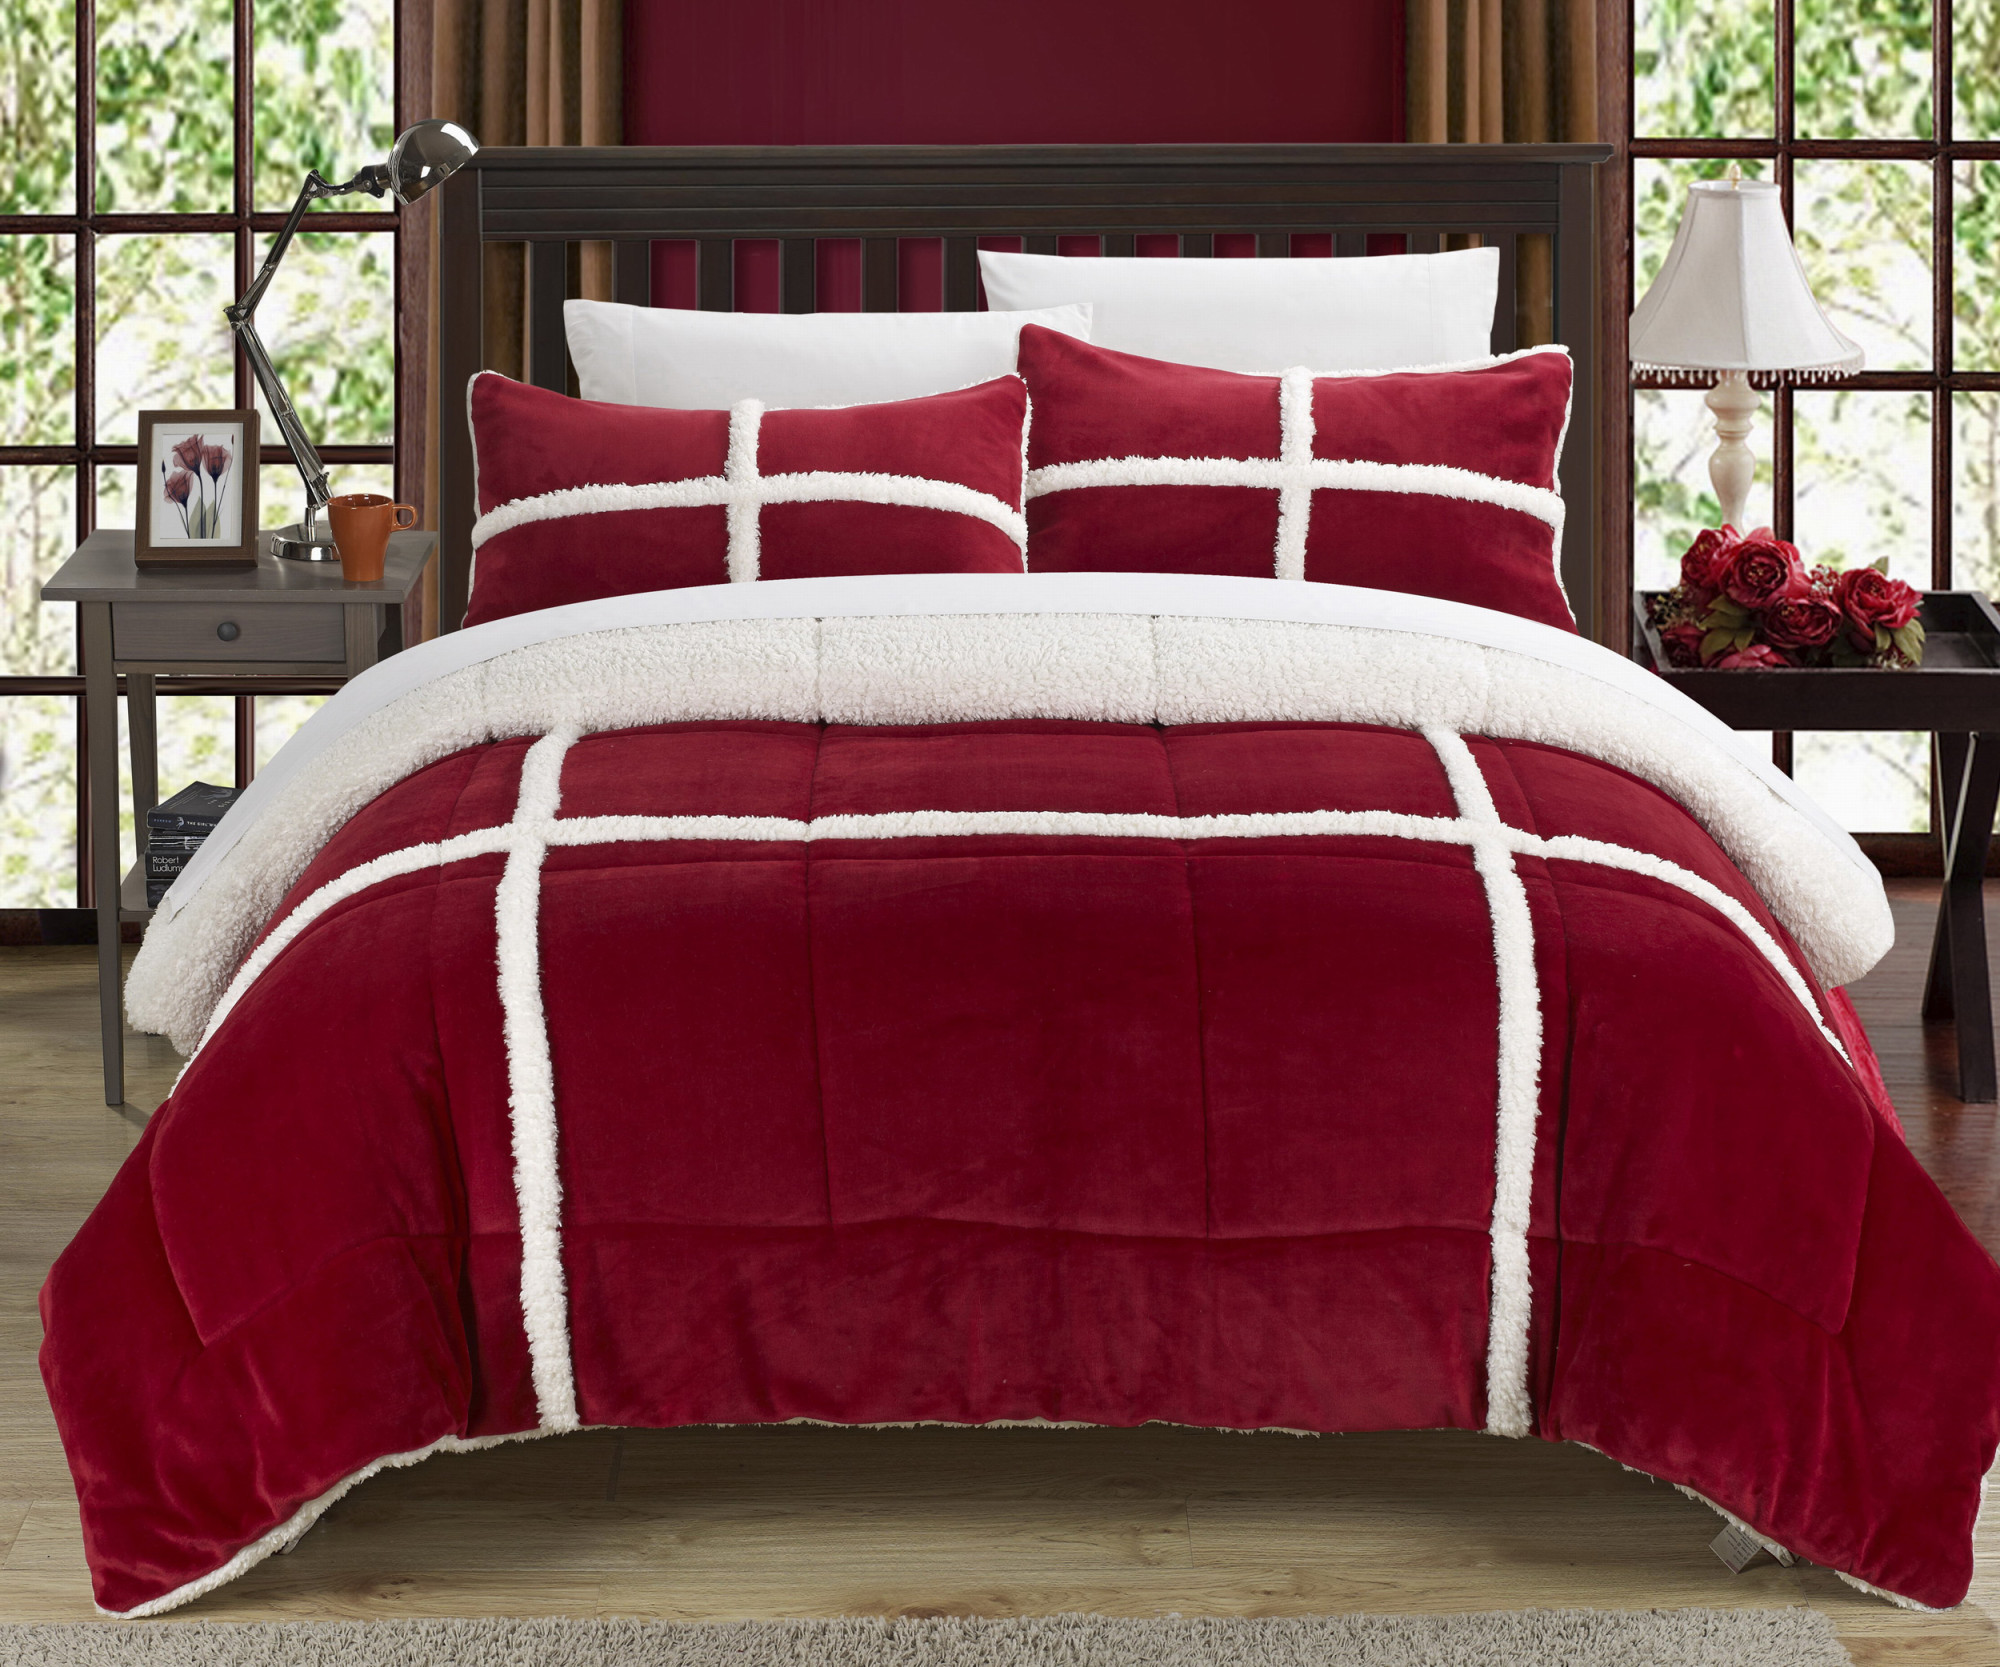 Chic Home Chiron 7 Piece Bed in a Bag Comforter Set